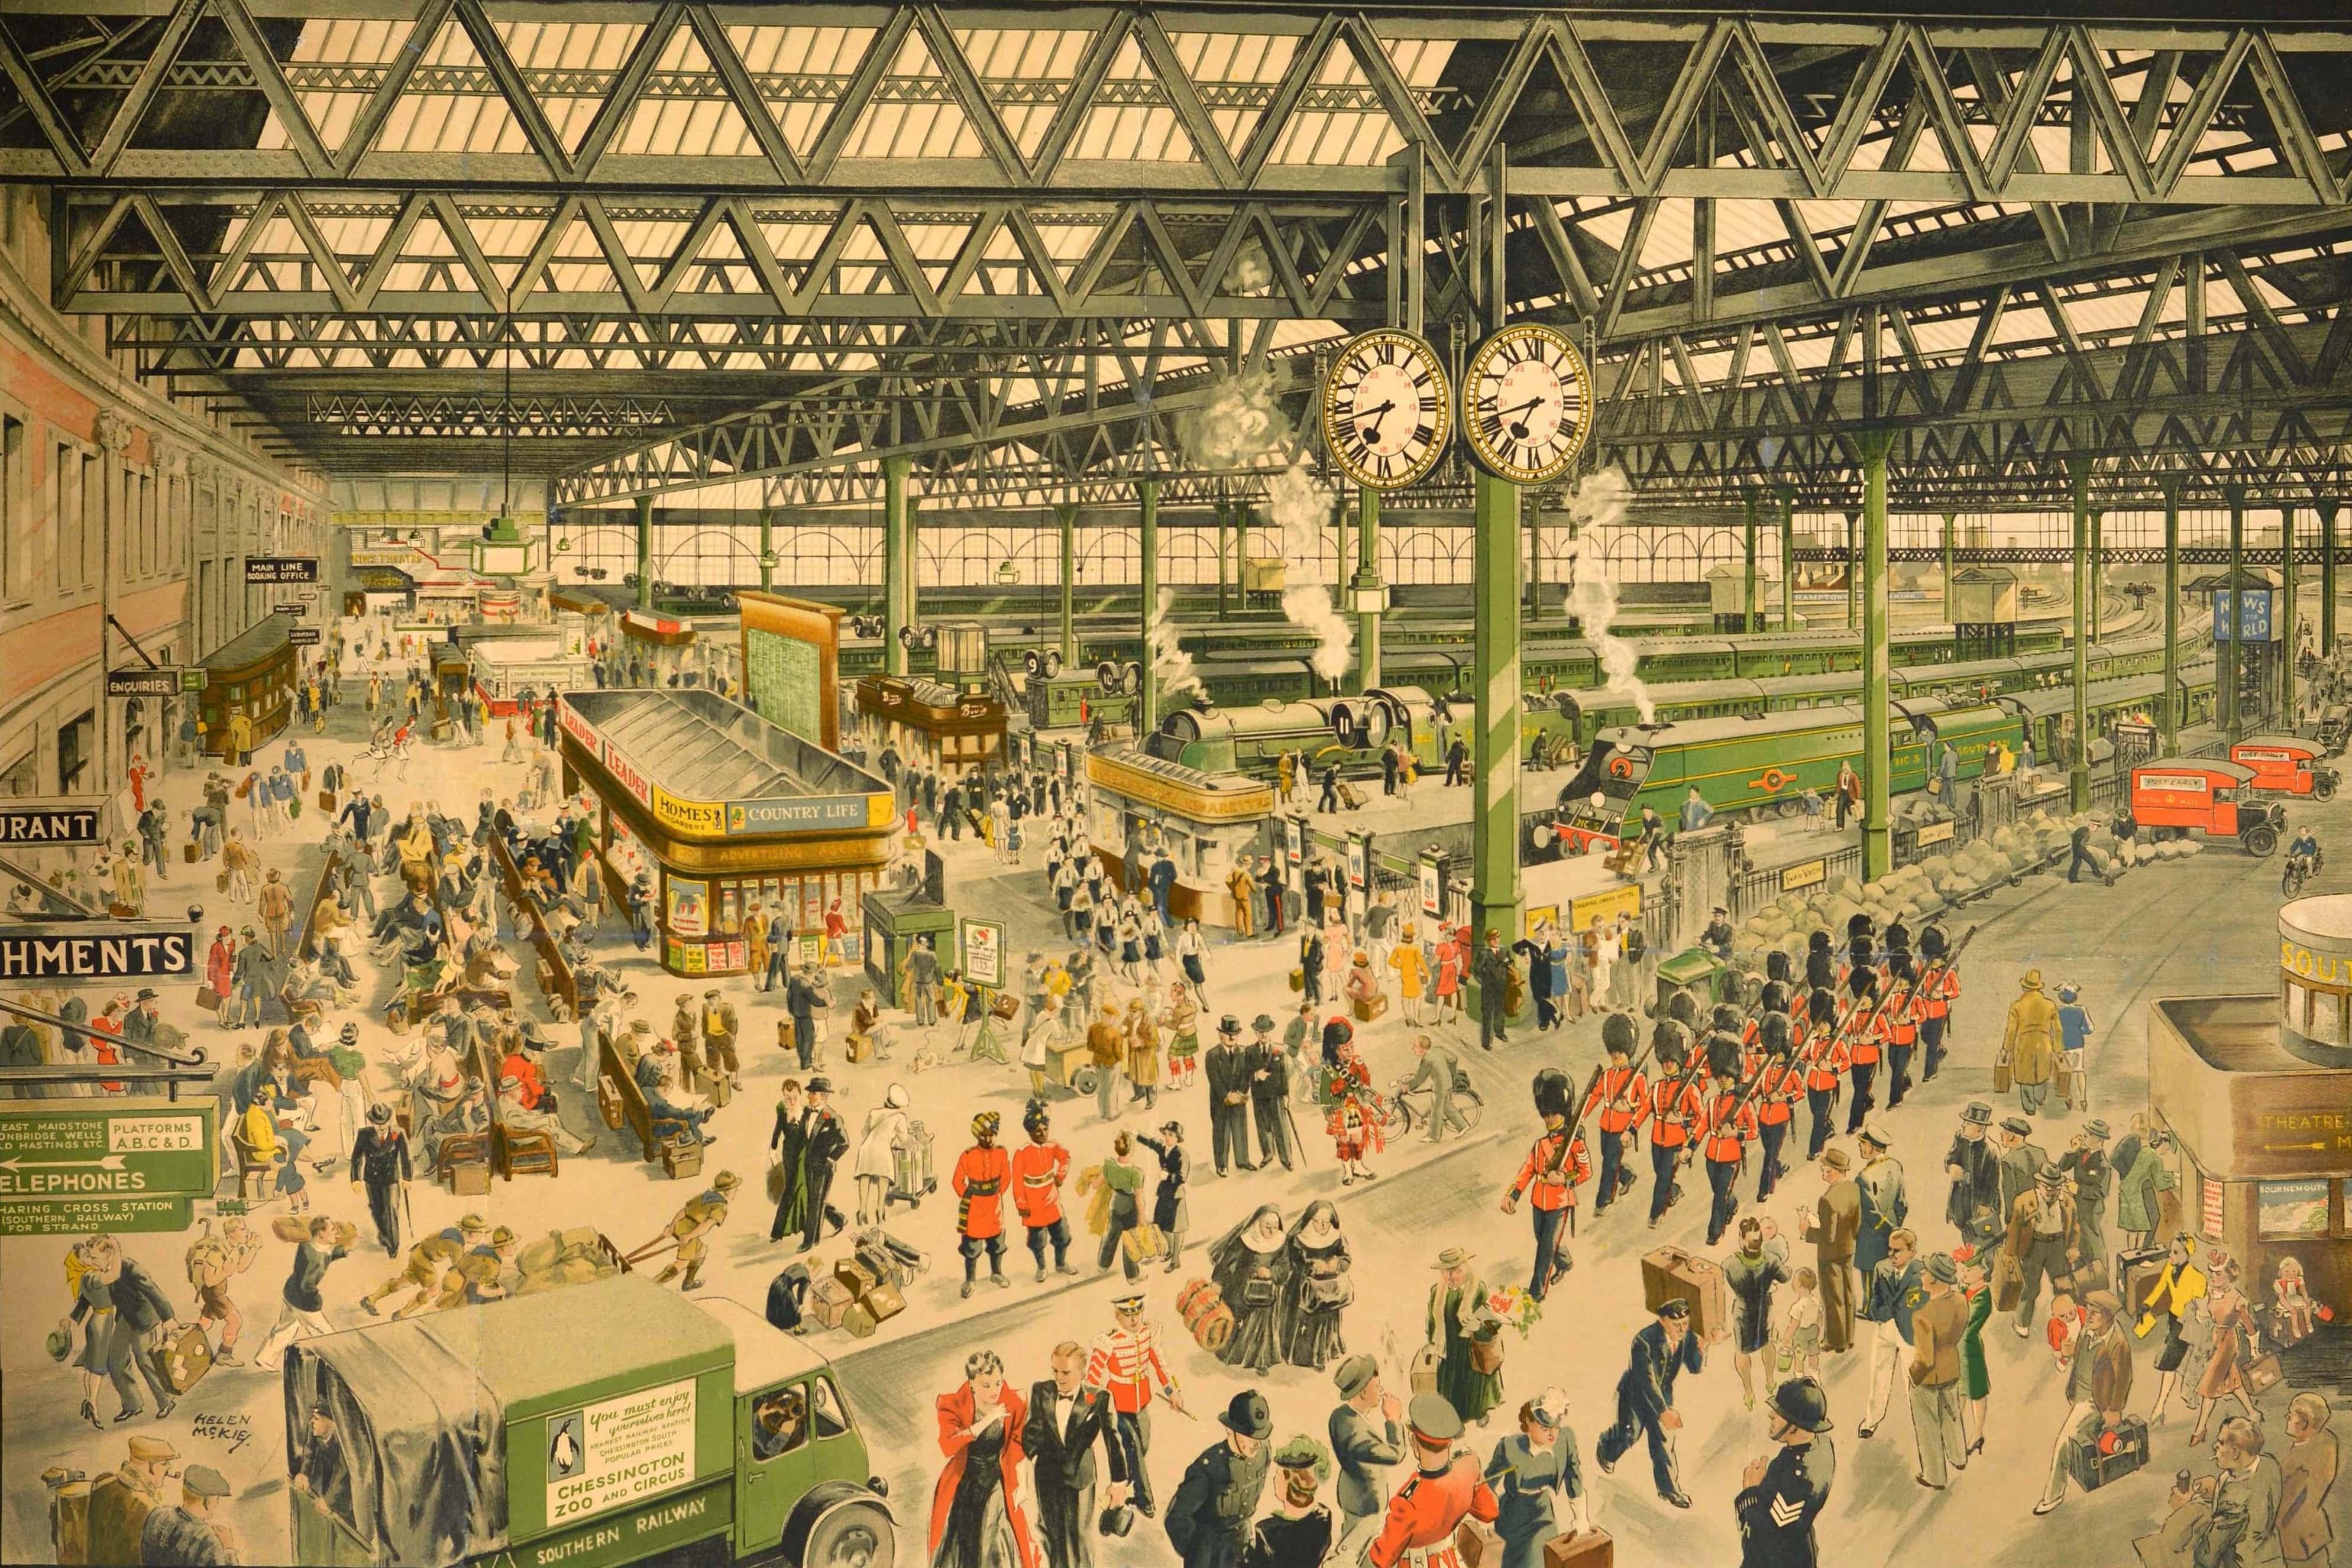 Original vintage train travel advertising poster issued by Southern Railway - Waterloo Station 1848-1948 A Centenary of Uninterrupted Service During Peace and War - featuring a detailed illustration of the busy Central London station depicting